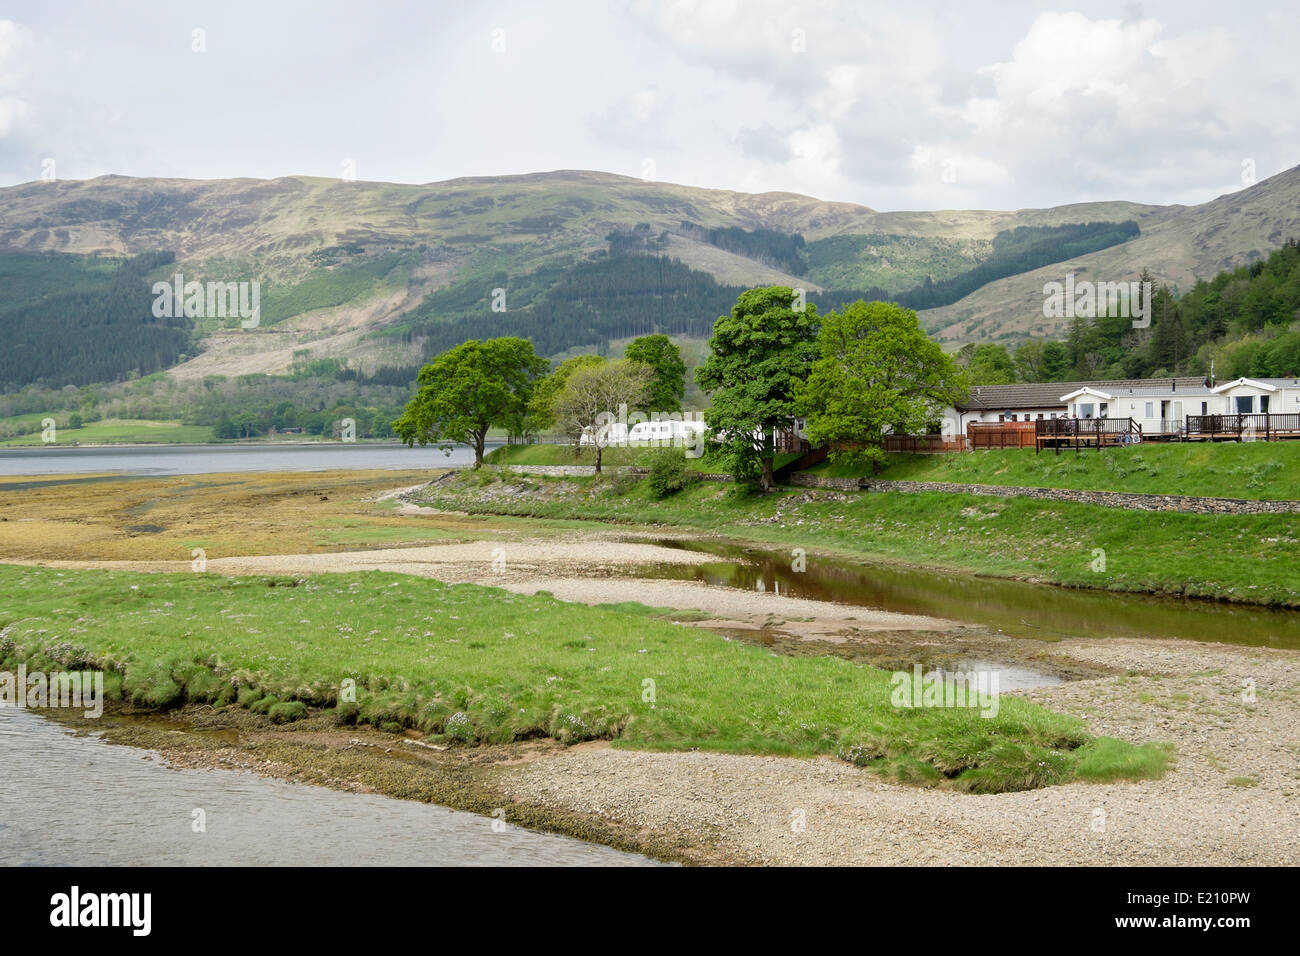 View across River Coe estuary to campsite with a view on banks of Loch Leven. Invercoe, Glencoe, Highland, Scotland, UK, Britain Stock Photo